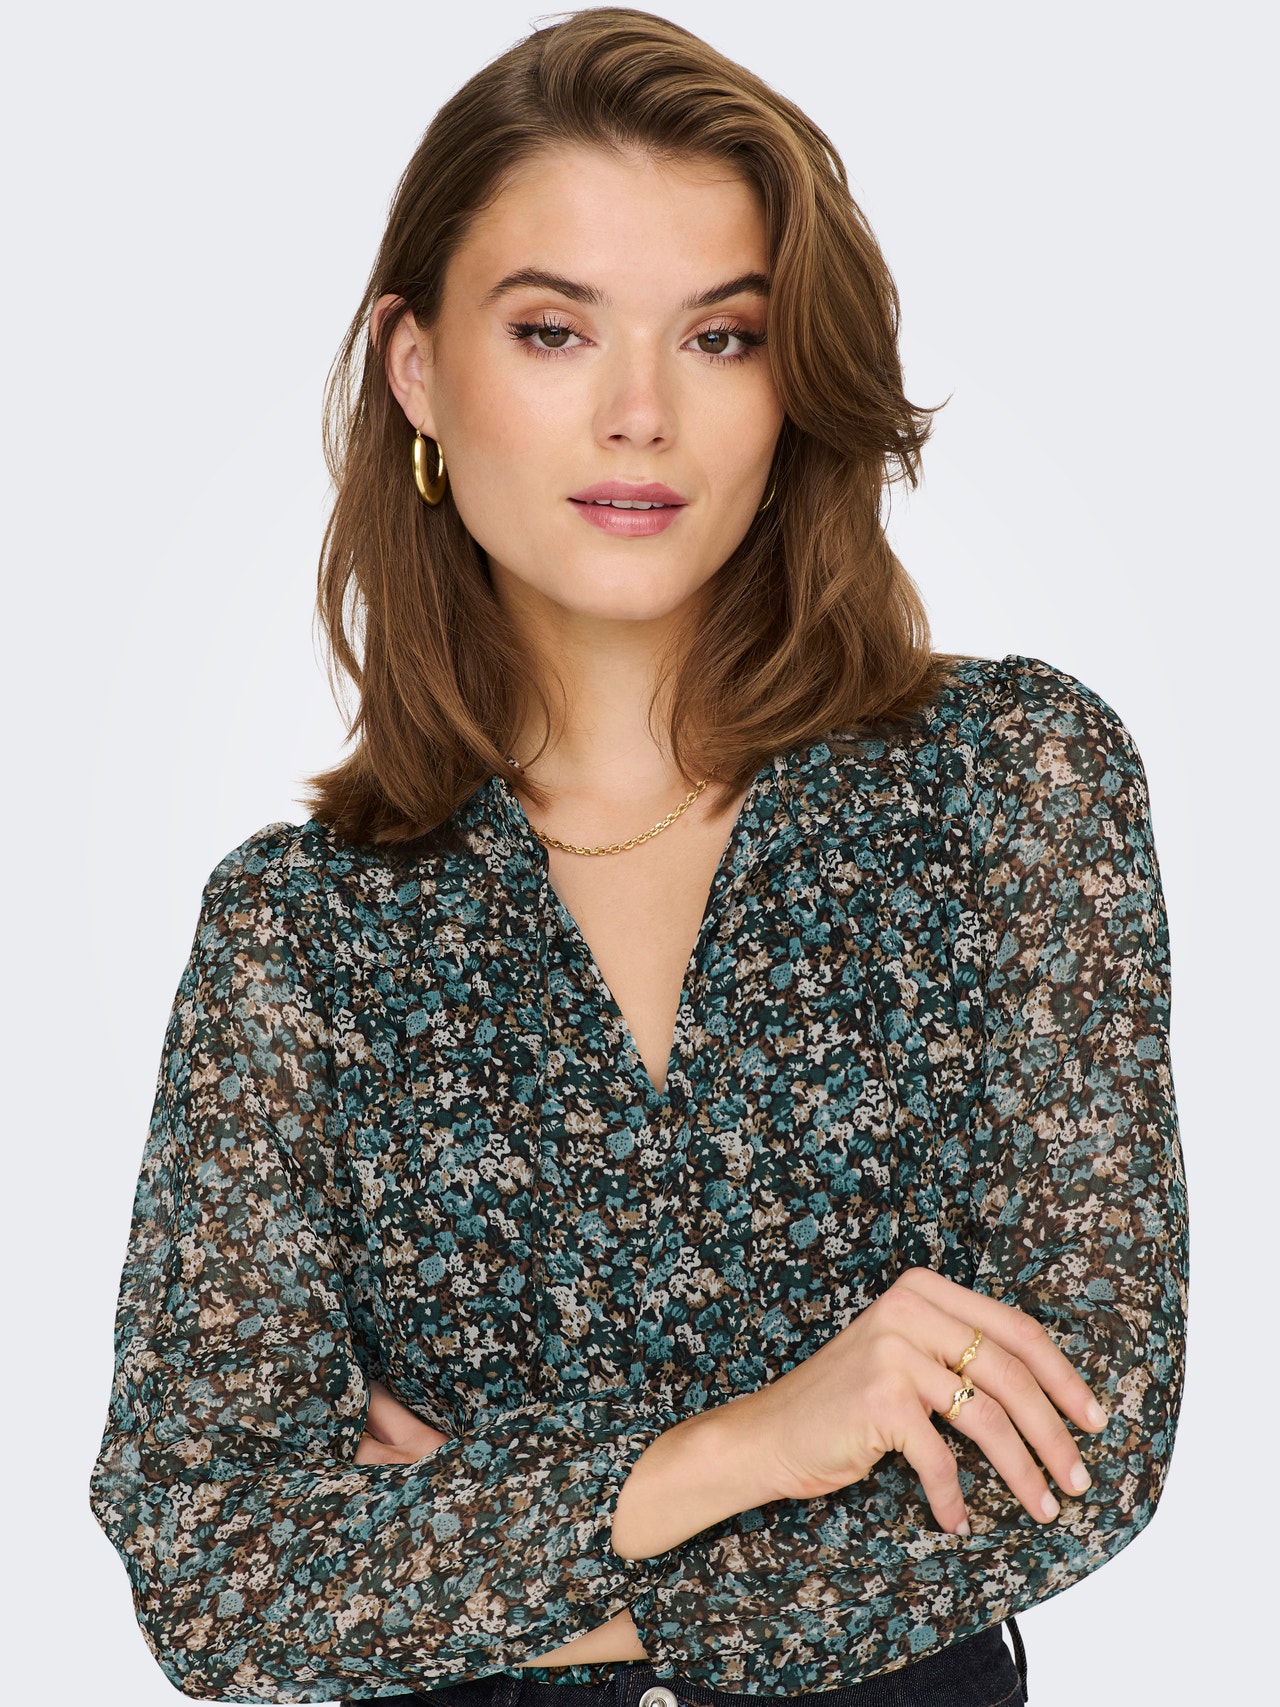 ONLY Patterned Blouse -Balsam Green - 15229700